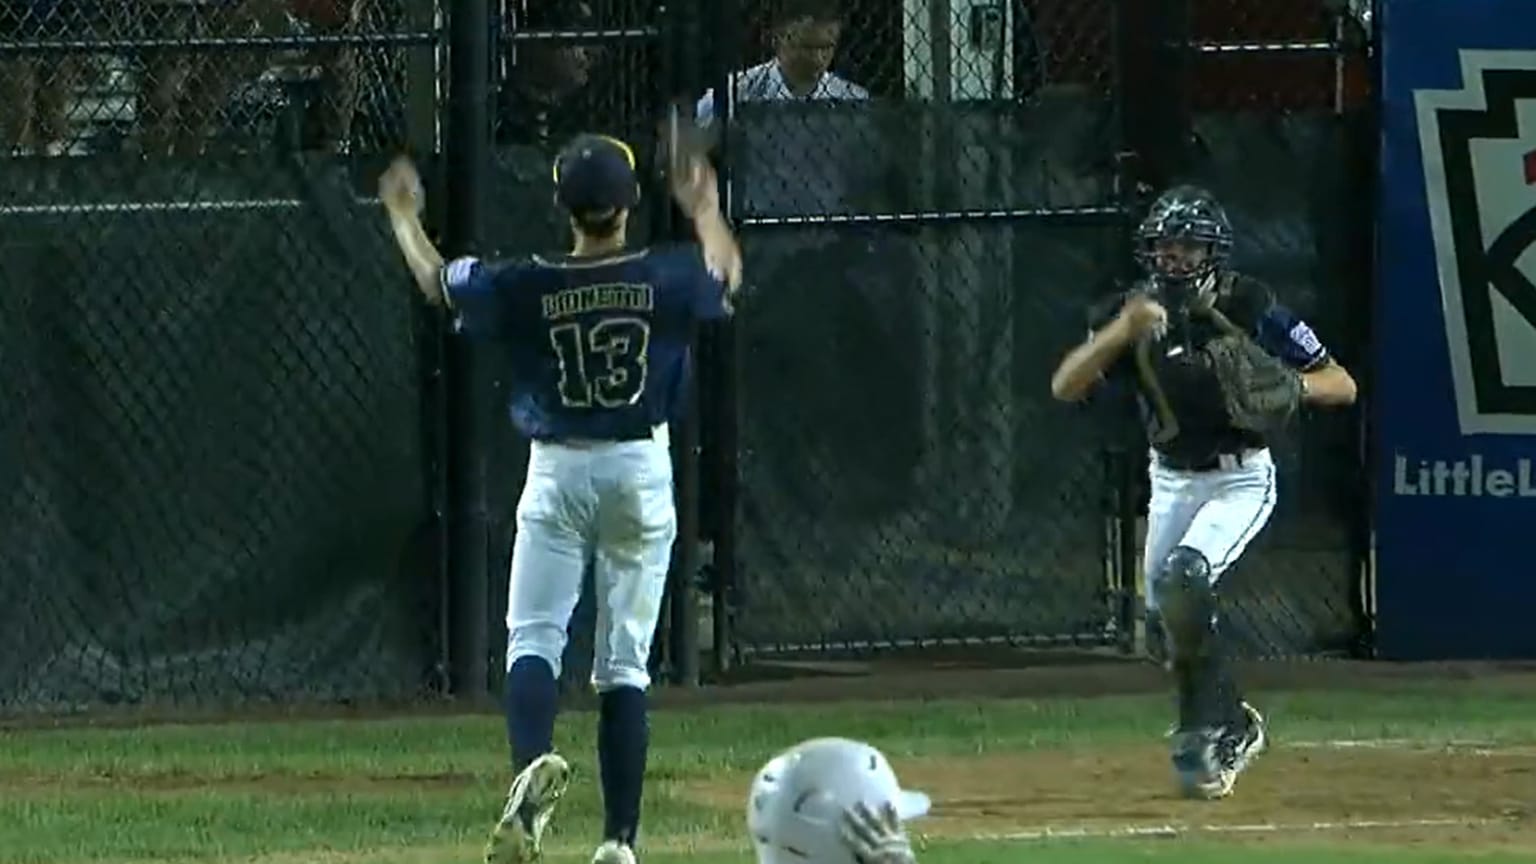 A Little League pitcher throws his arms in the air in celebration as the catcher runs toward him